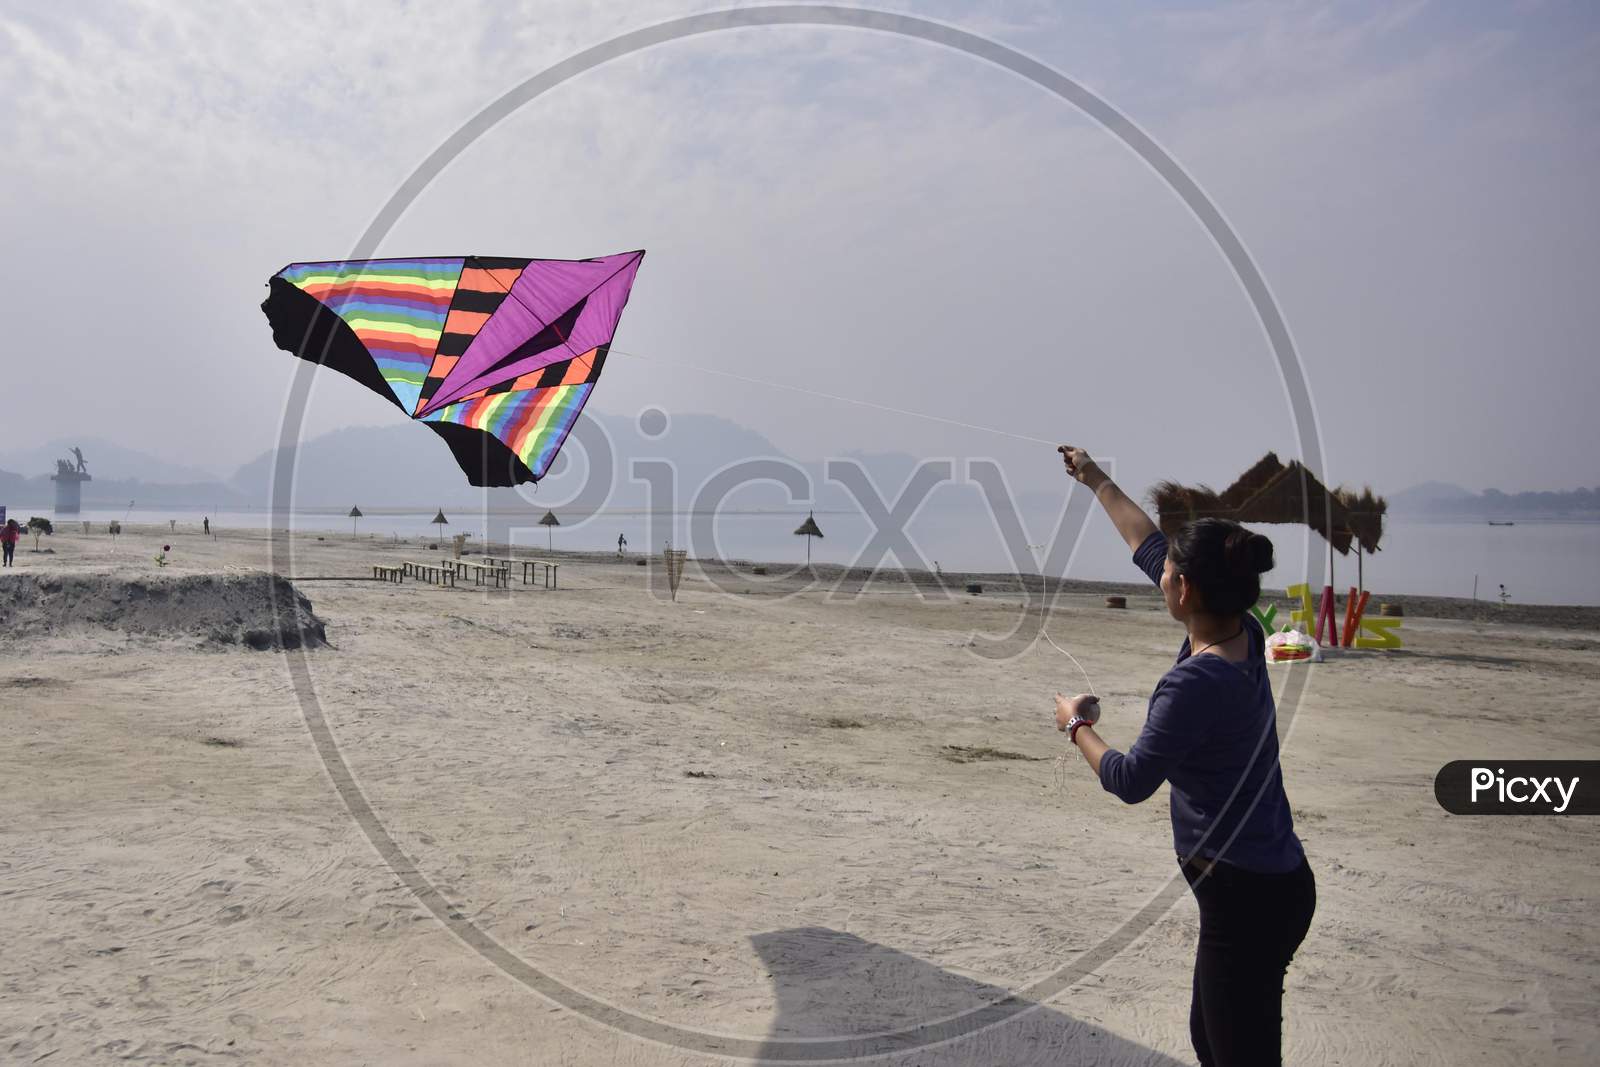 Girls During Jeevan Kite and River Festival on the bank of river Brahmaputra in Guwahati